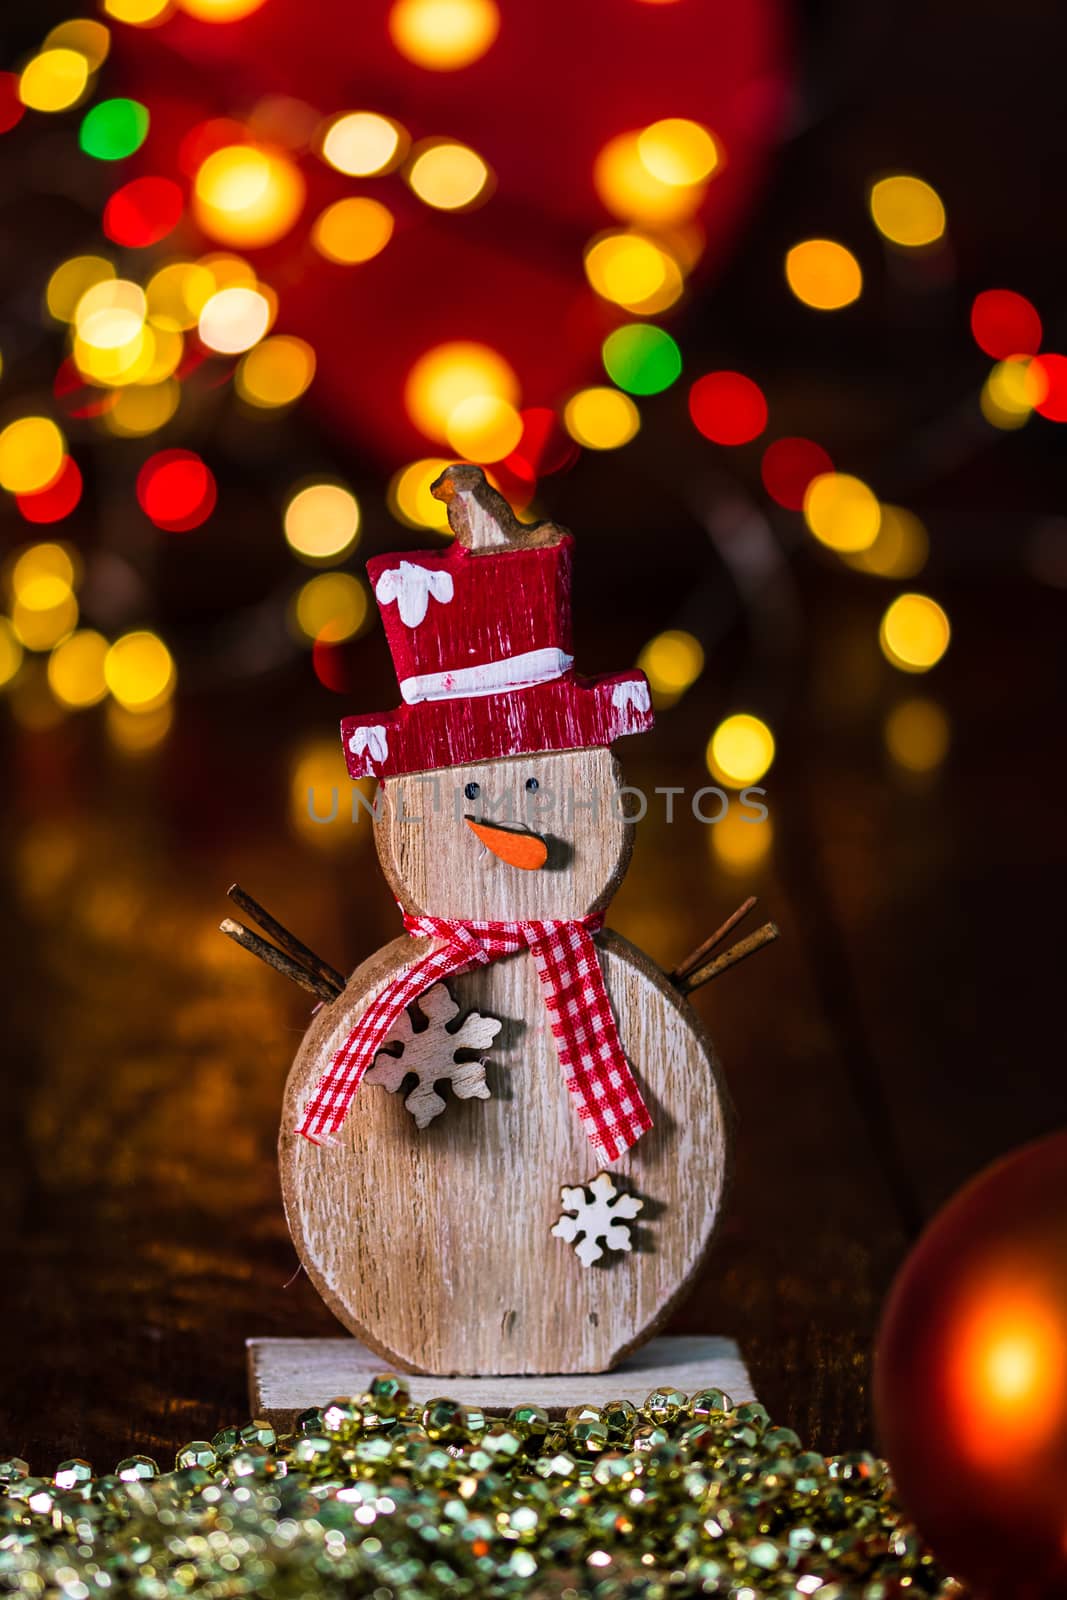 Decorations and ornaments in a colorful Christmas composition isolated on background of blurred lights.